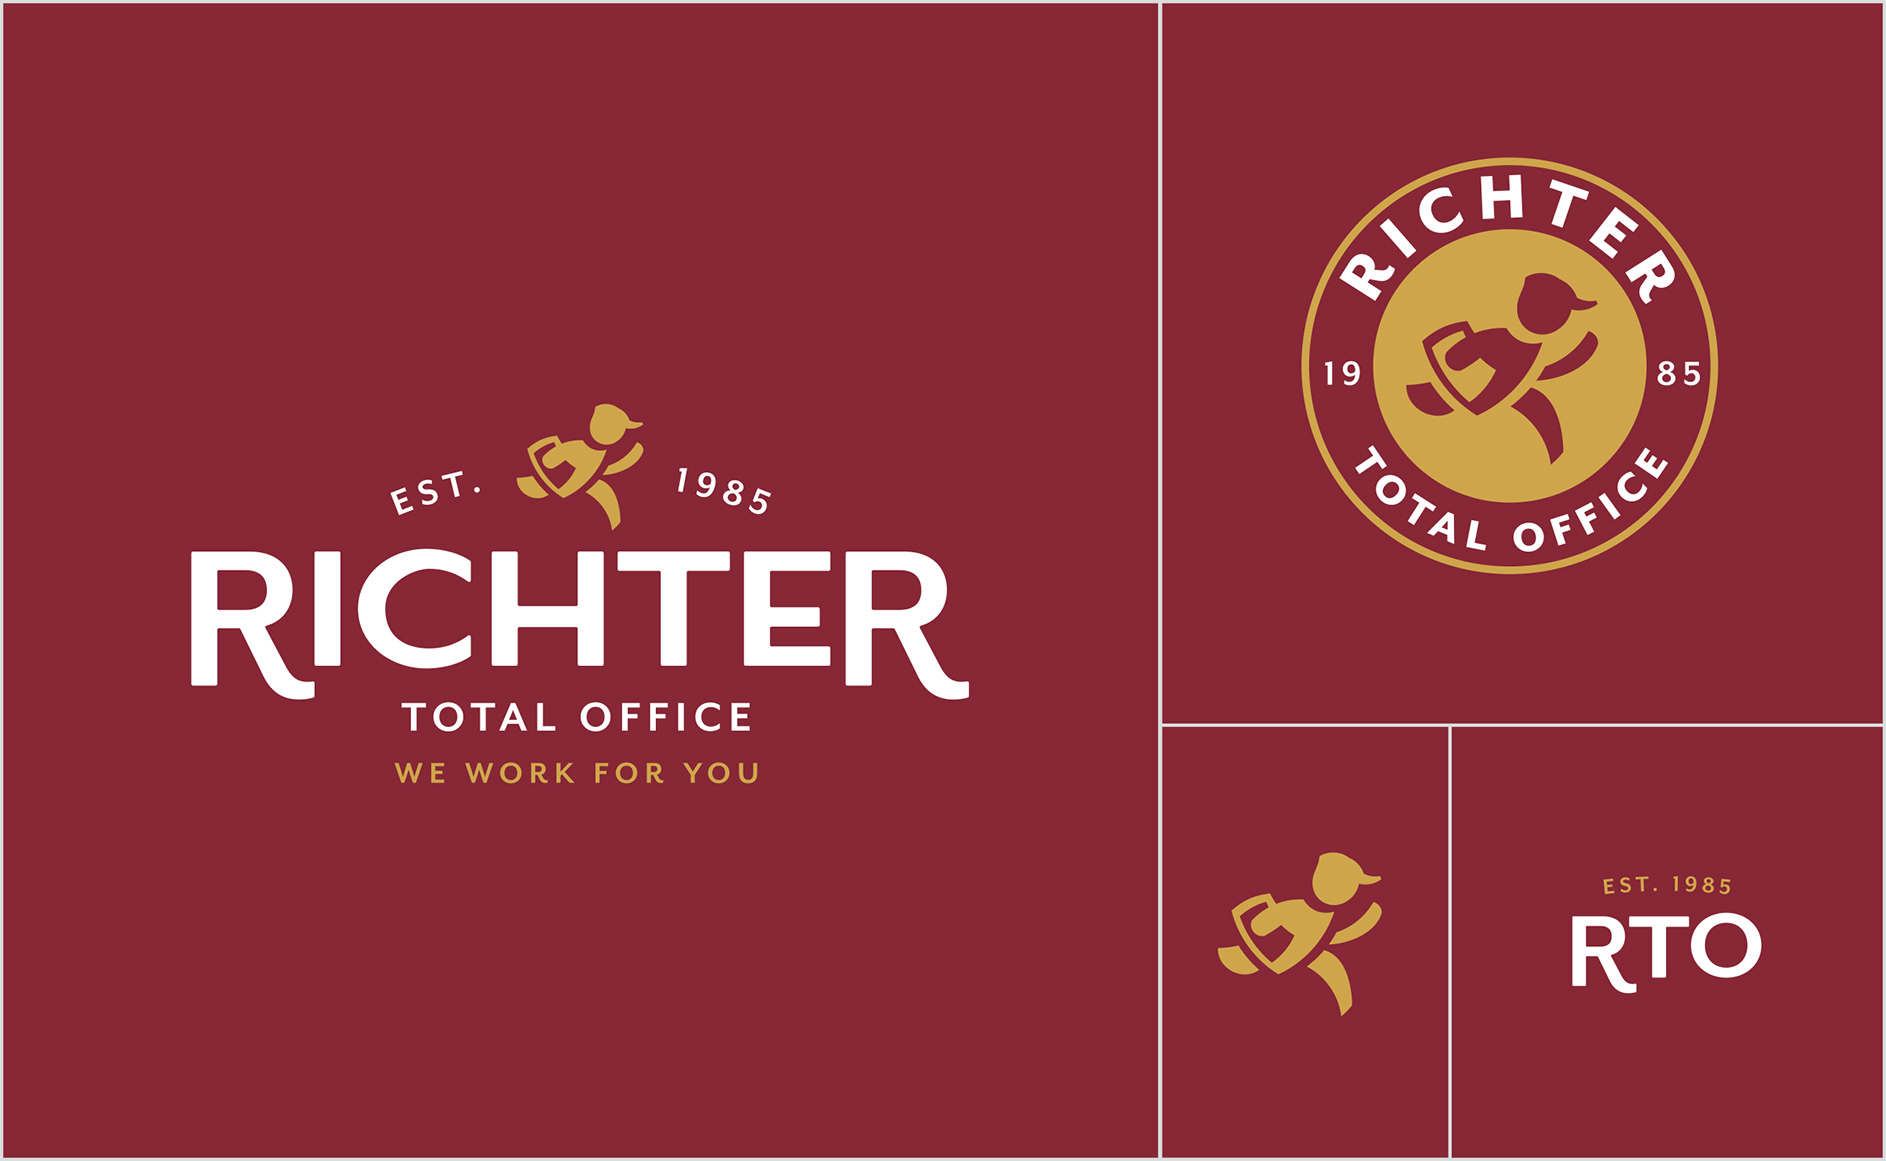 Richter Total Office main logo branding page 1